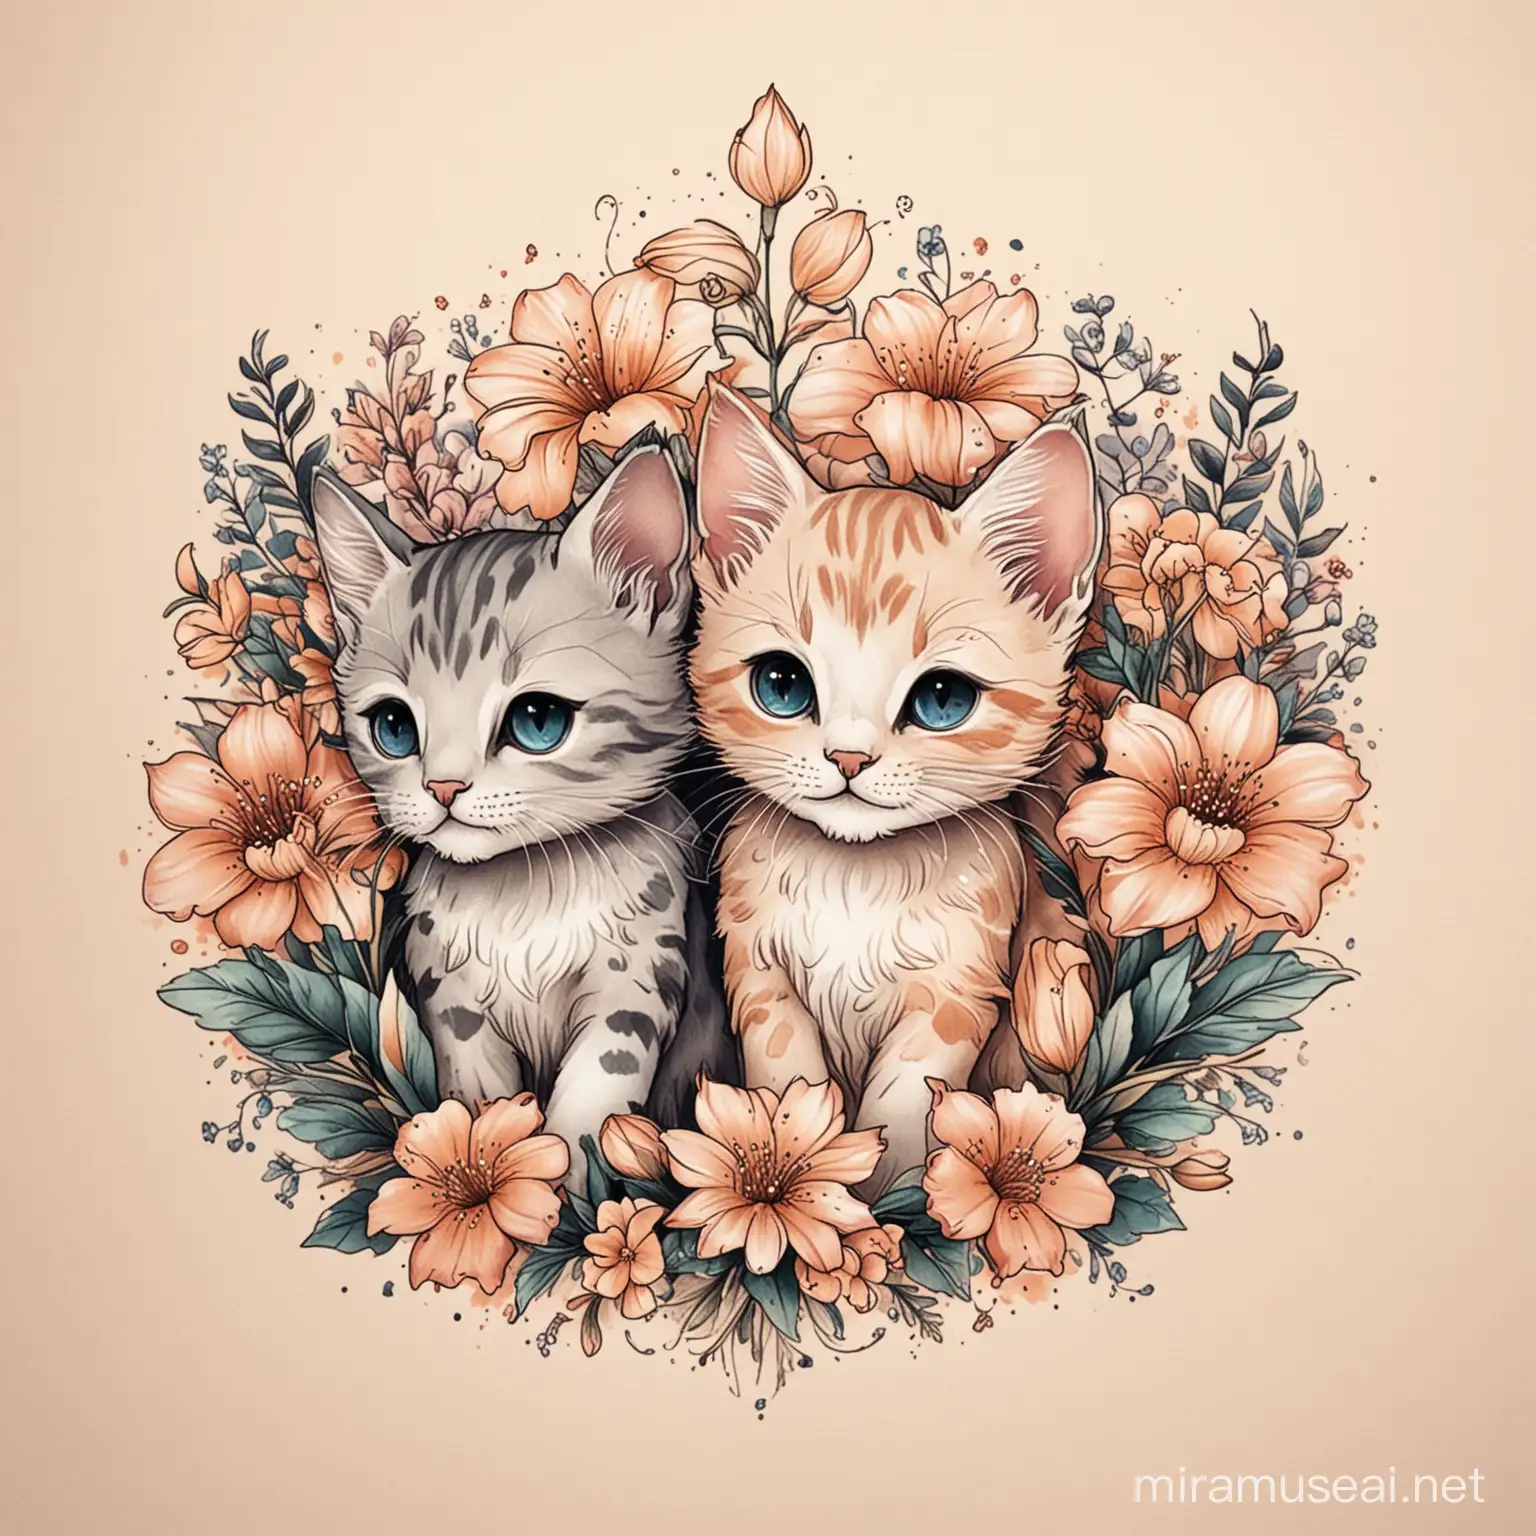 Playful Kittens with Flowers Tattoo Design